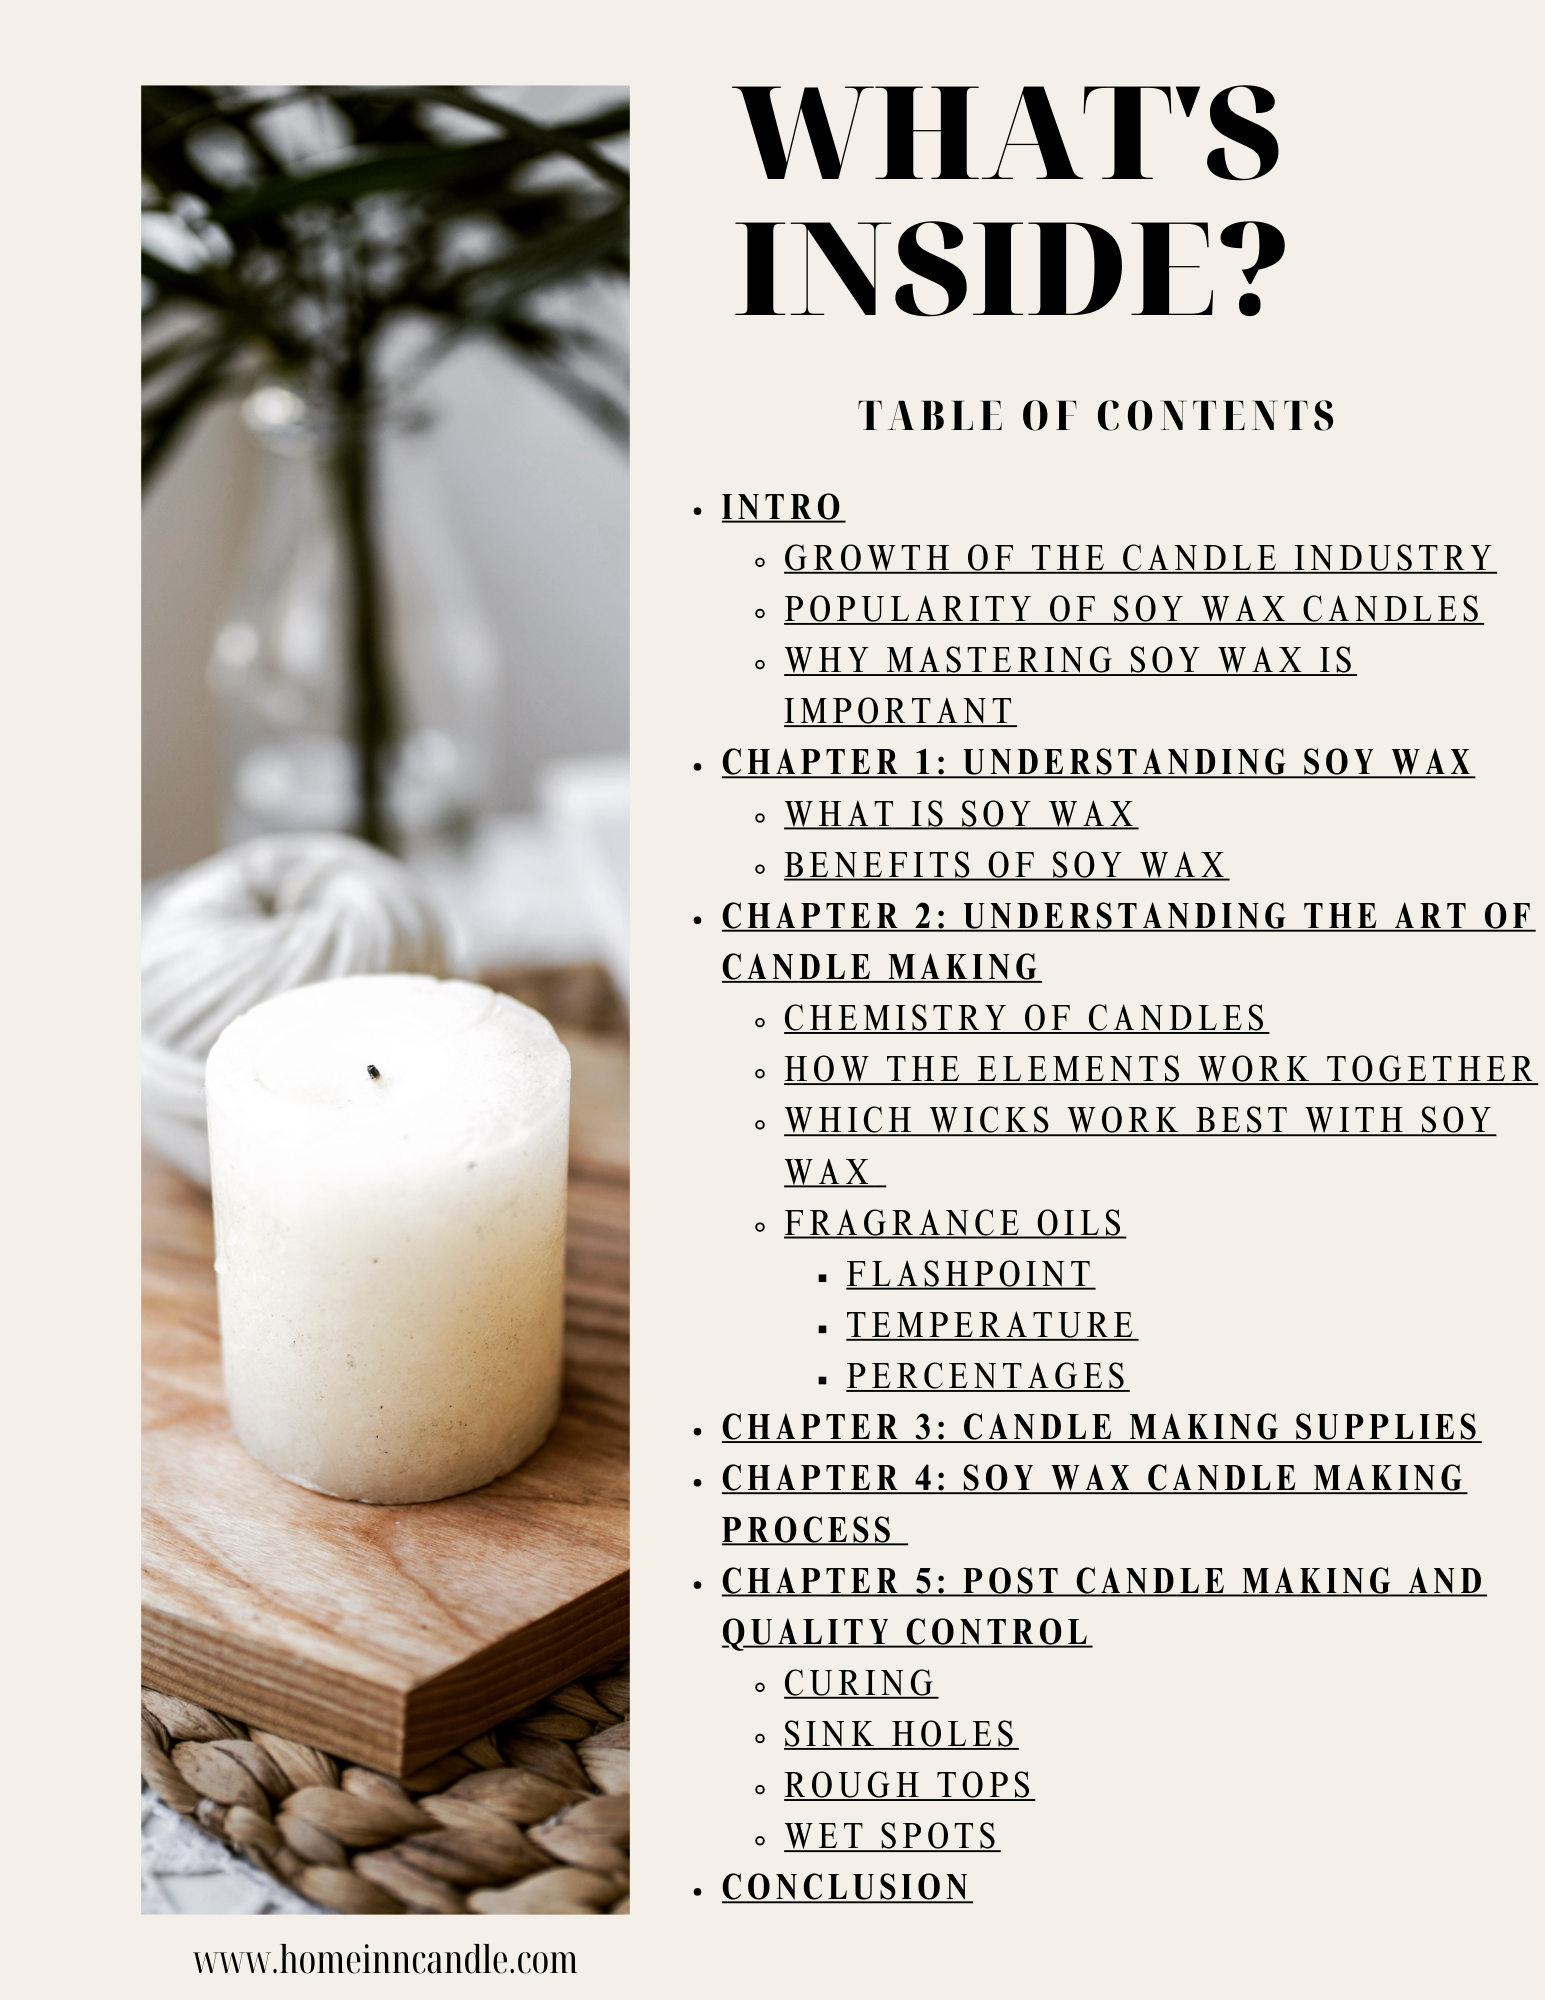 Best Soy Wax For Candle Making - Learn How To Make Soy Candles at Home